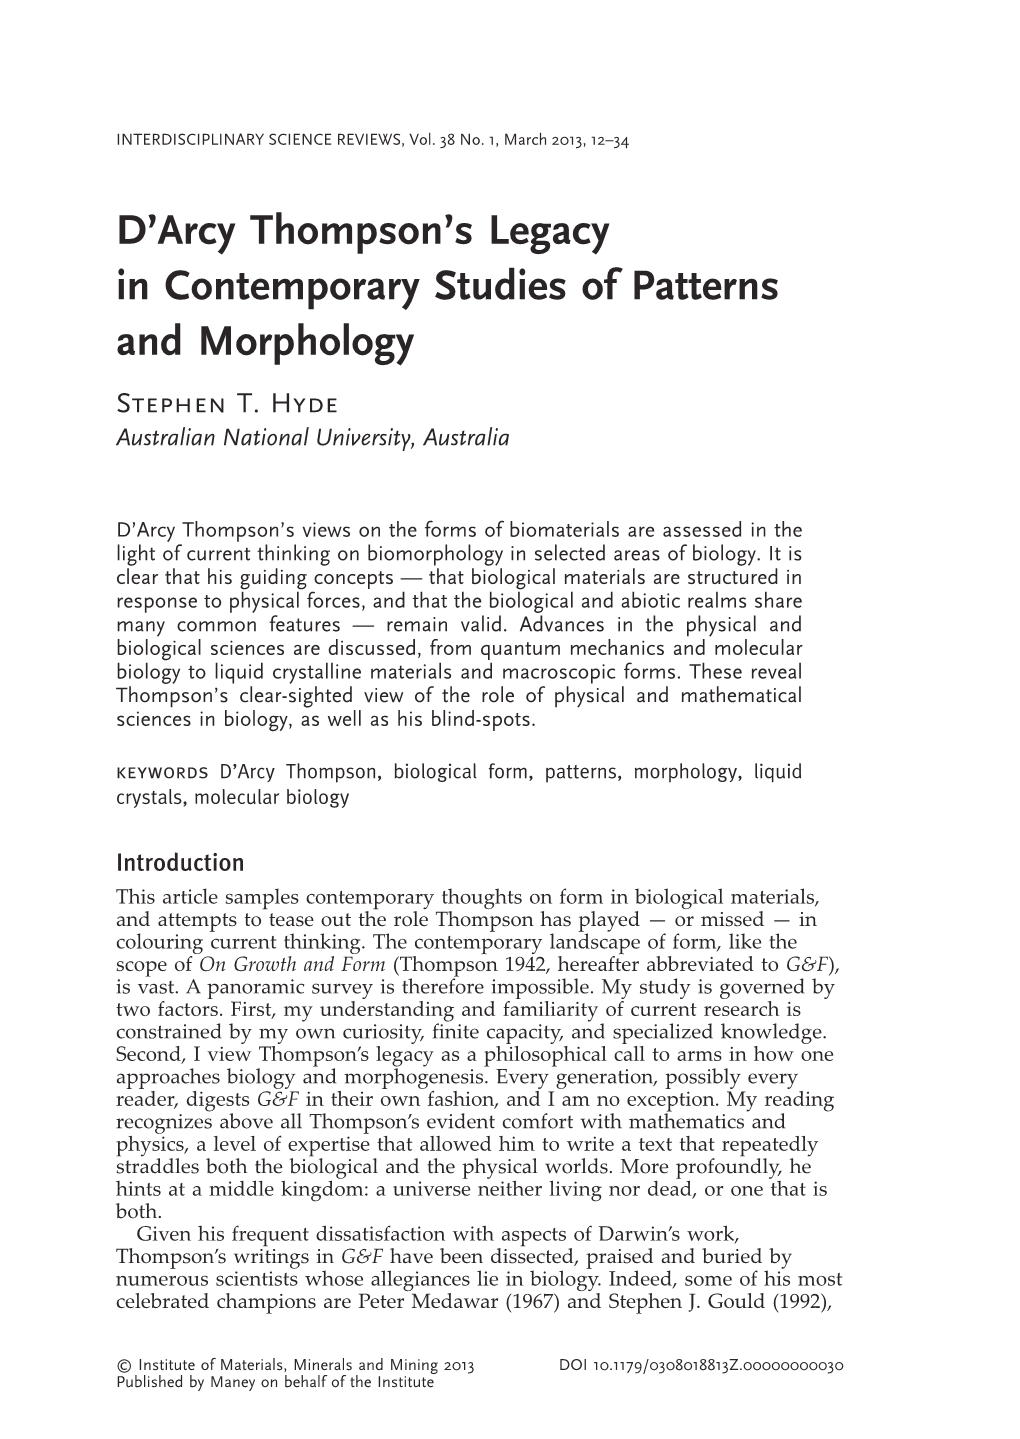 D'arcy Thompson's Legacy in Contemporary Studies of Patterns